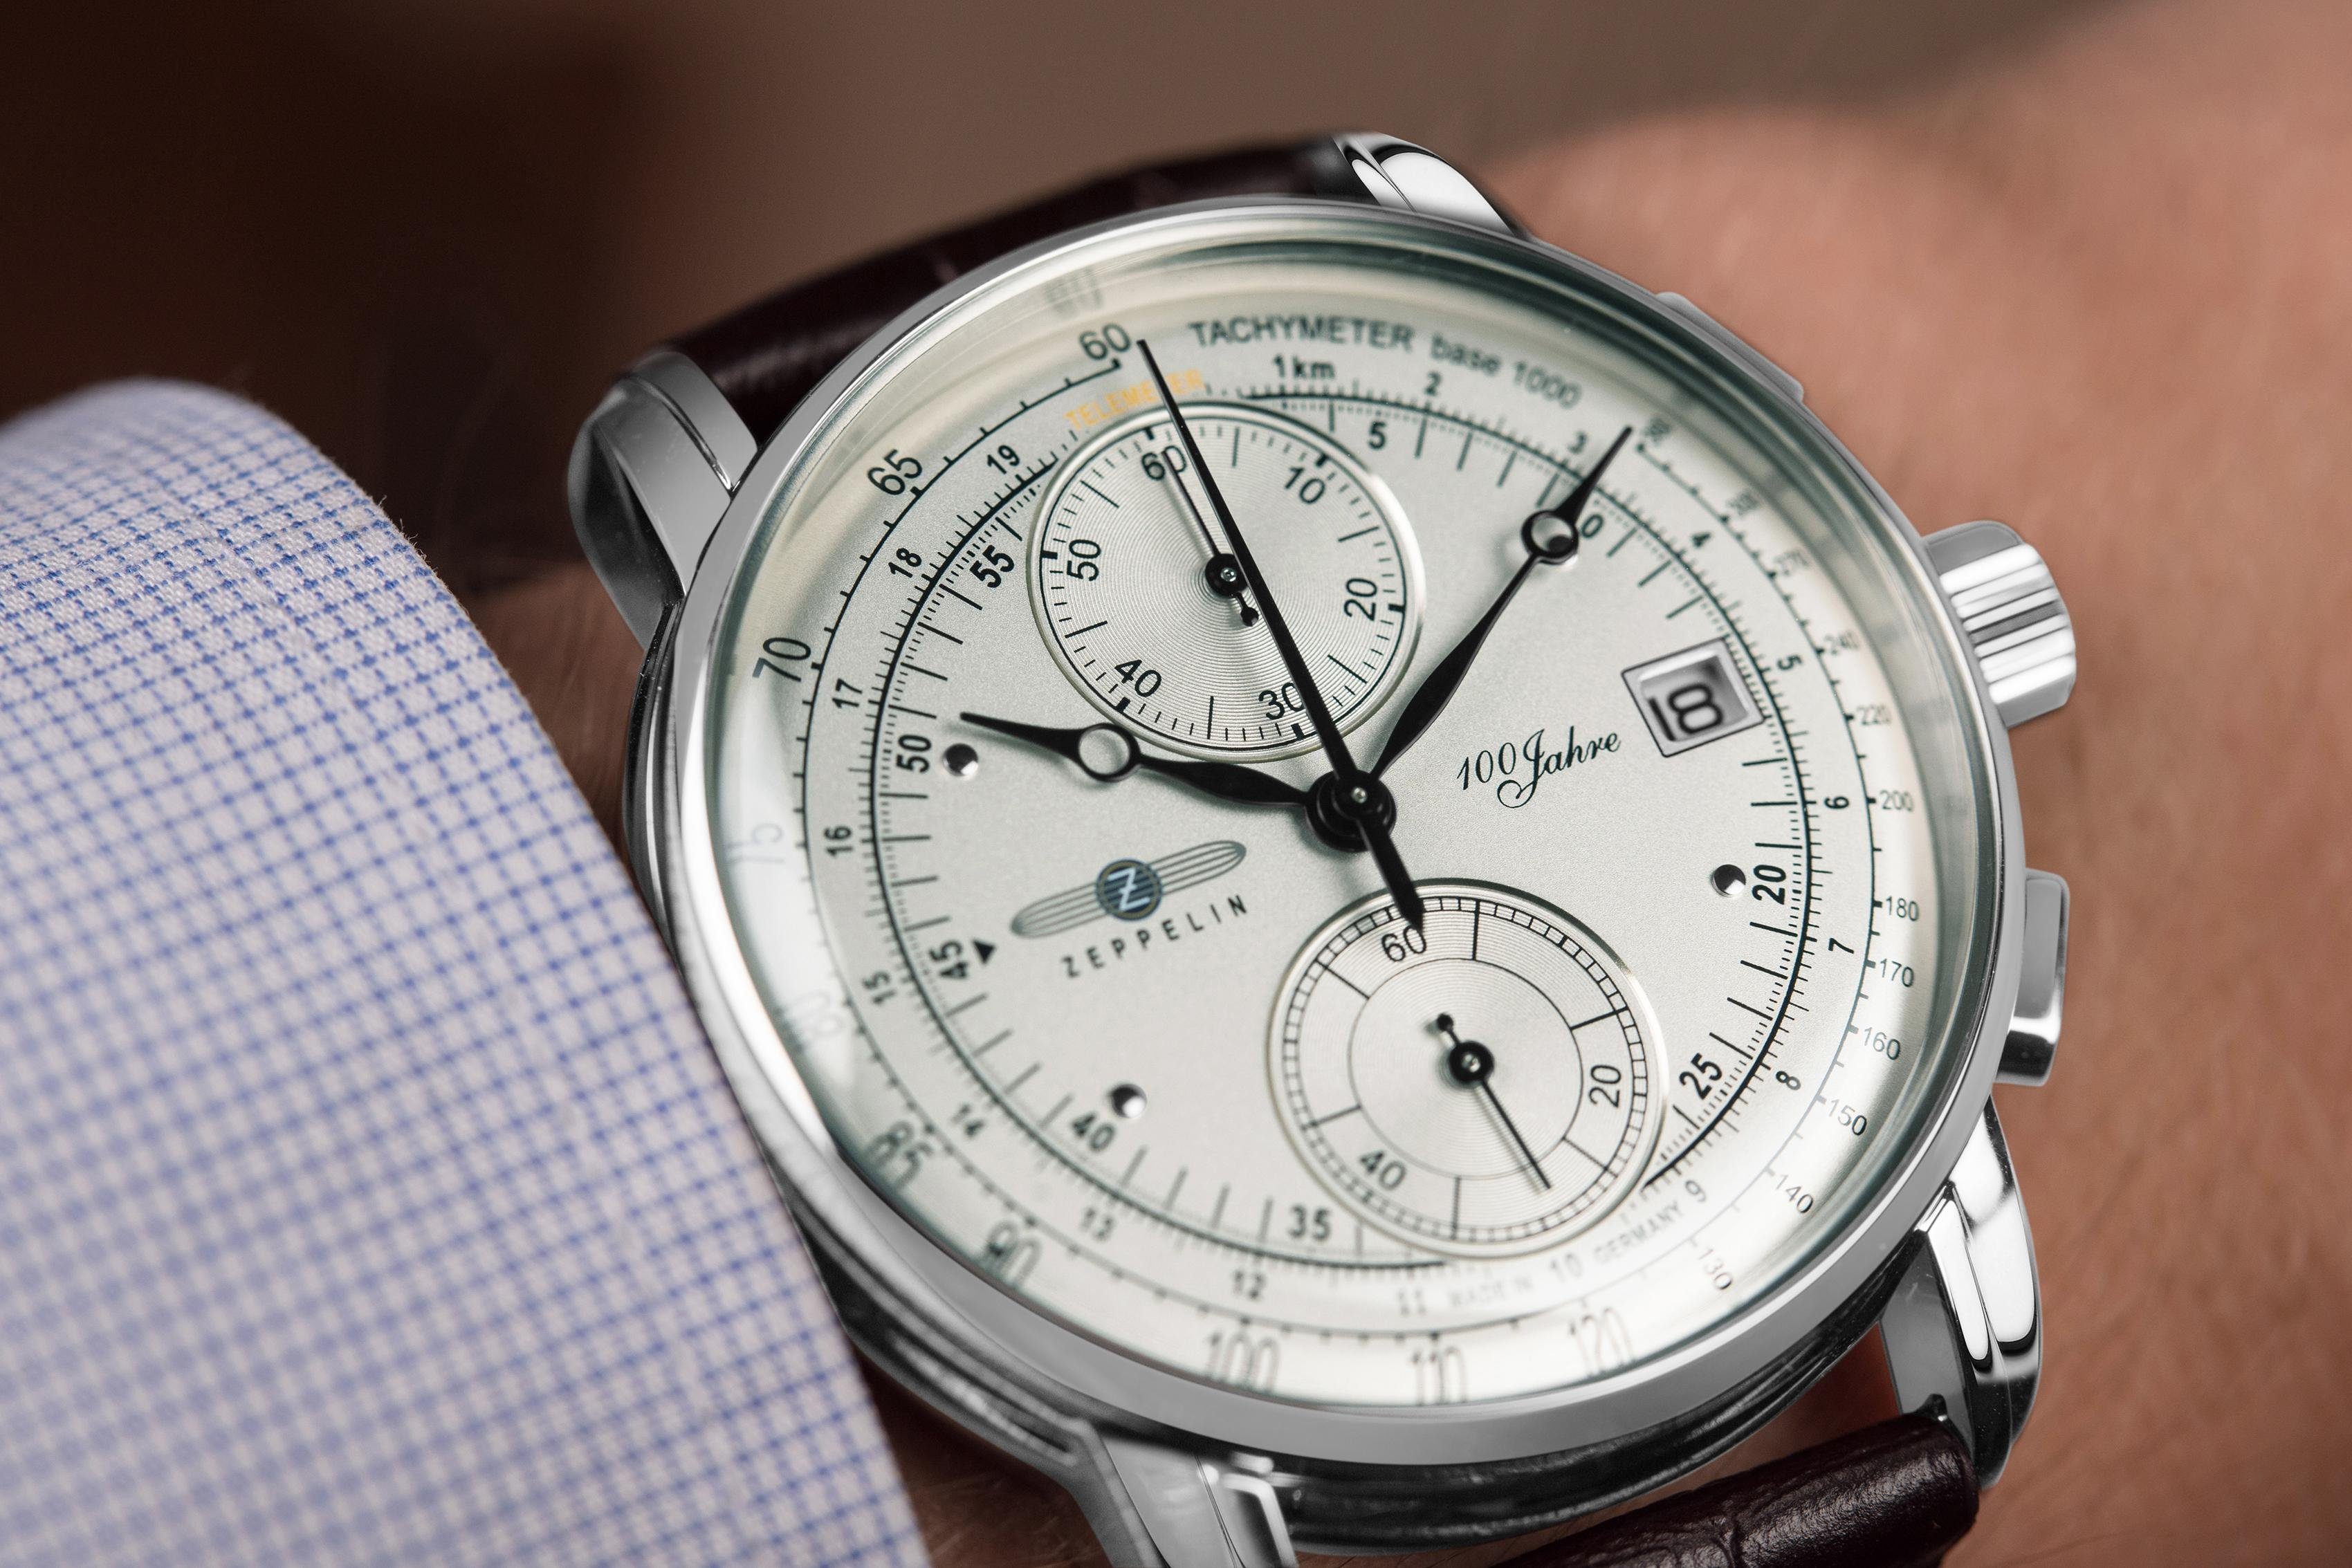 ZEPPELIN Chronograph 100 Jahre Zeppelin, 86701, in Germany made